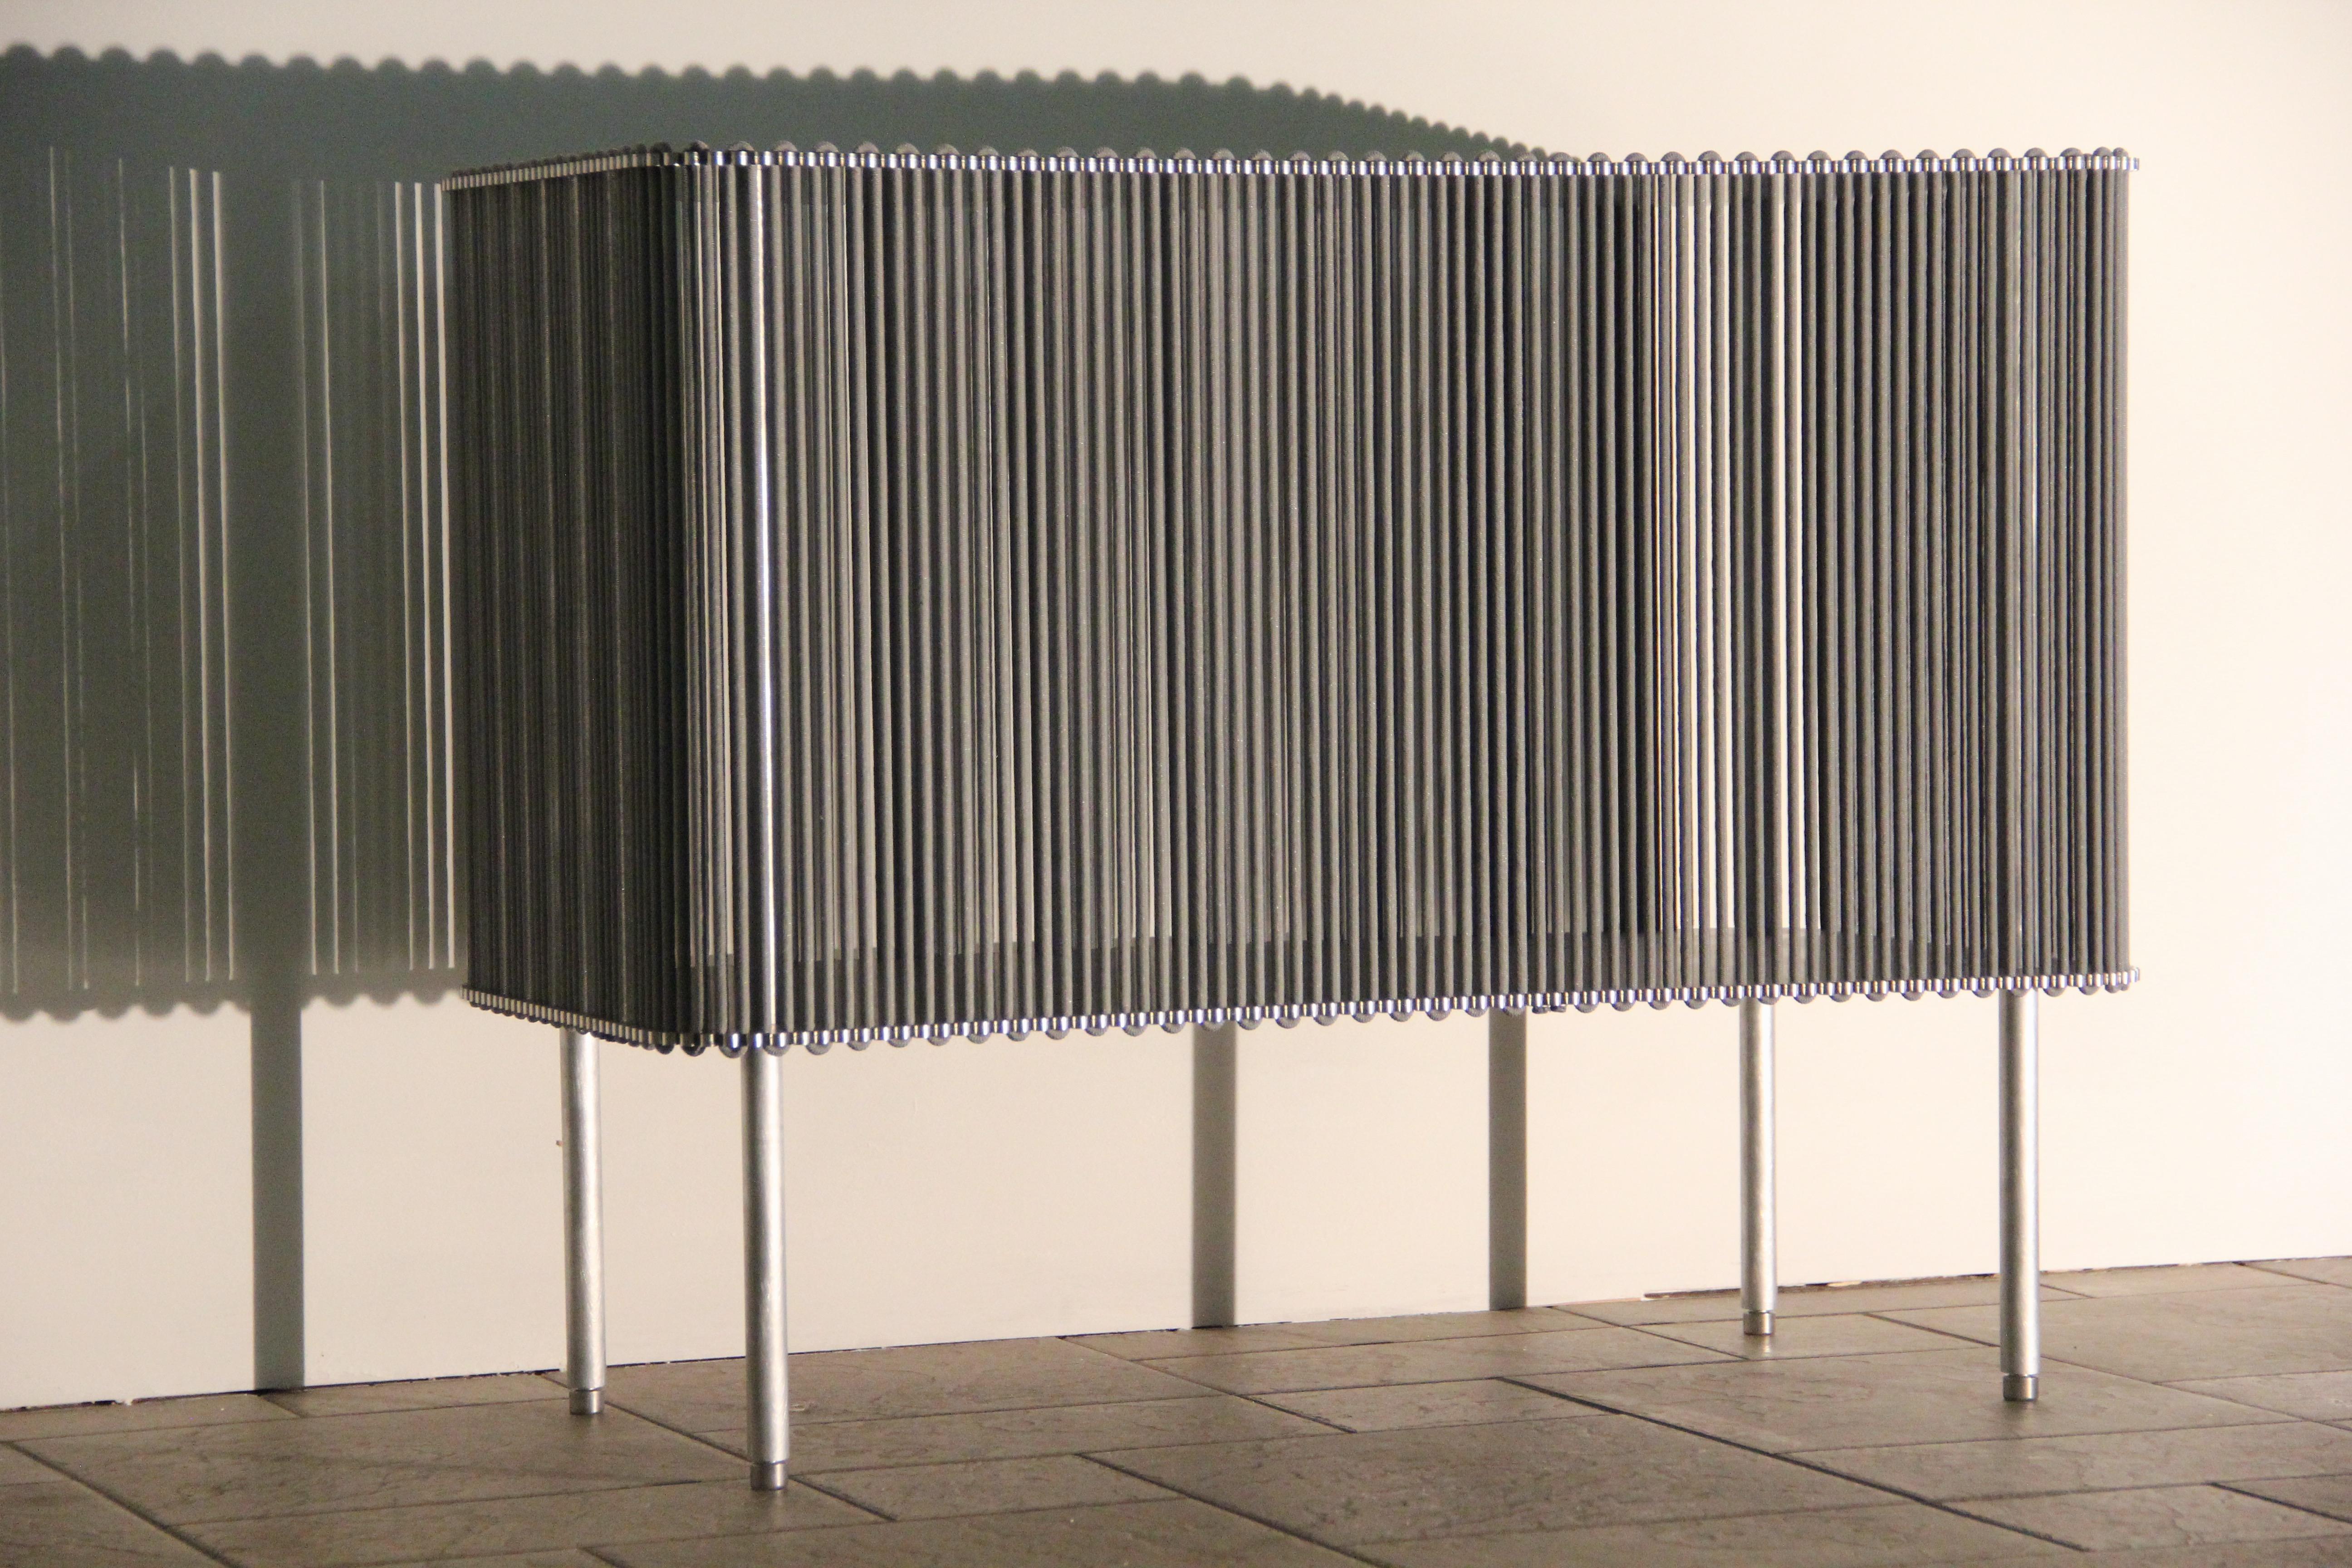 Coil #1 low cabinet by Bram Kerkhofs.
Dimensions: H 63.5 x L 80 x W 40 cm
Materials: Stainless steel, aluminium, elastic rope (natural rubber, polyethylene).

Other dimensions are available.

COIL is a modular cabinet system in which the